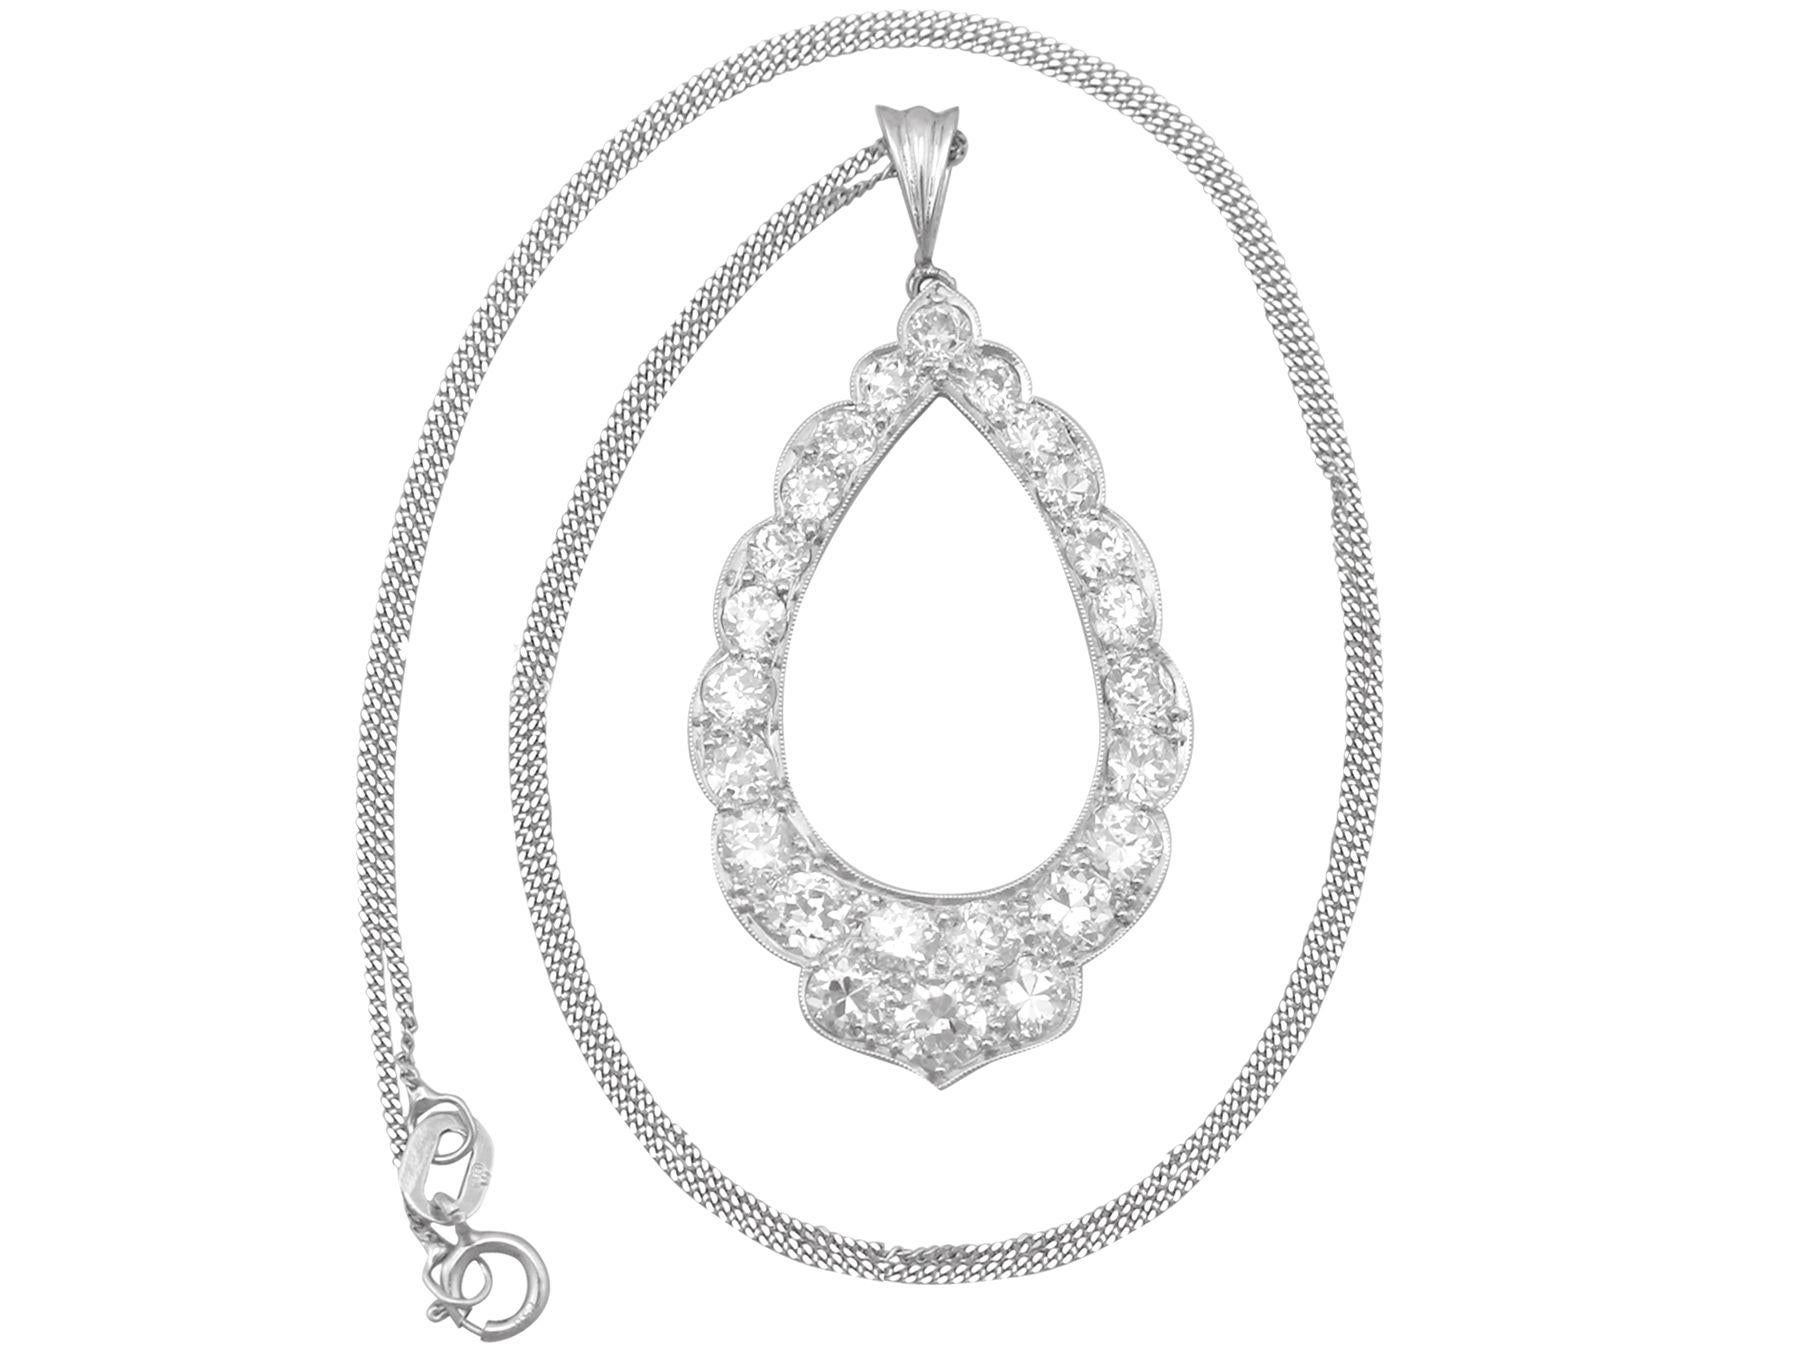 A stunning, fine and impressive antique 2.35Ct diamond and platinum pendant; part of our antique jewelry and estate jewelry collections.

This stunning, fine and impressive antique diamond pendant has been crafted in platinum.

The pierced decorated